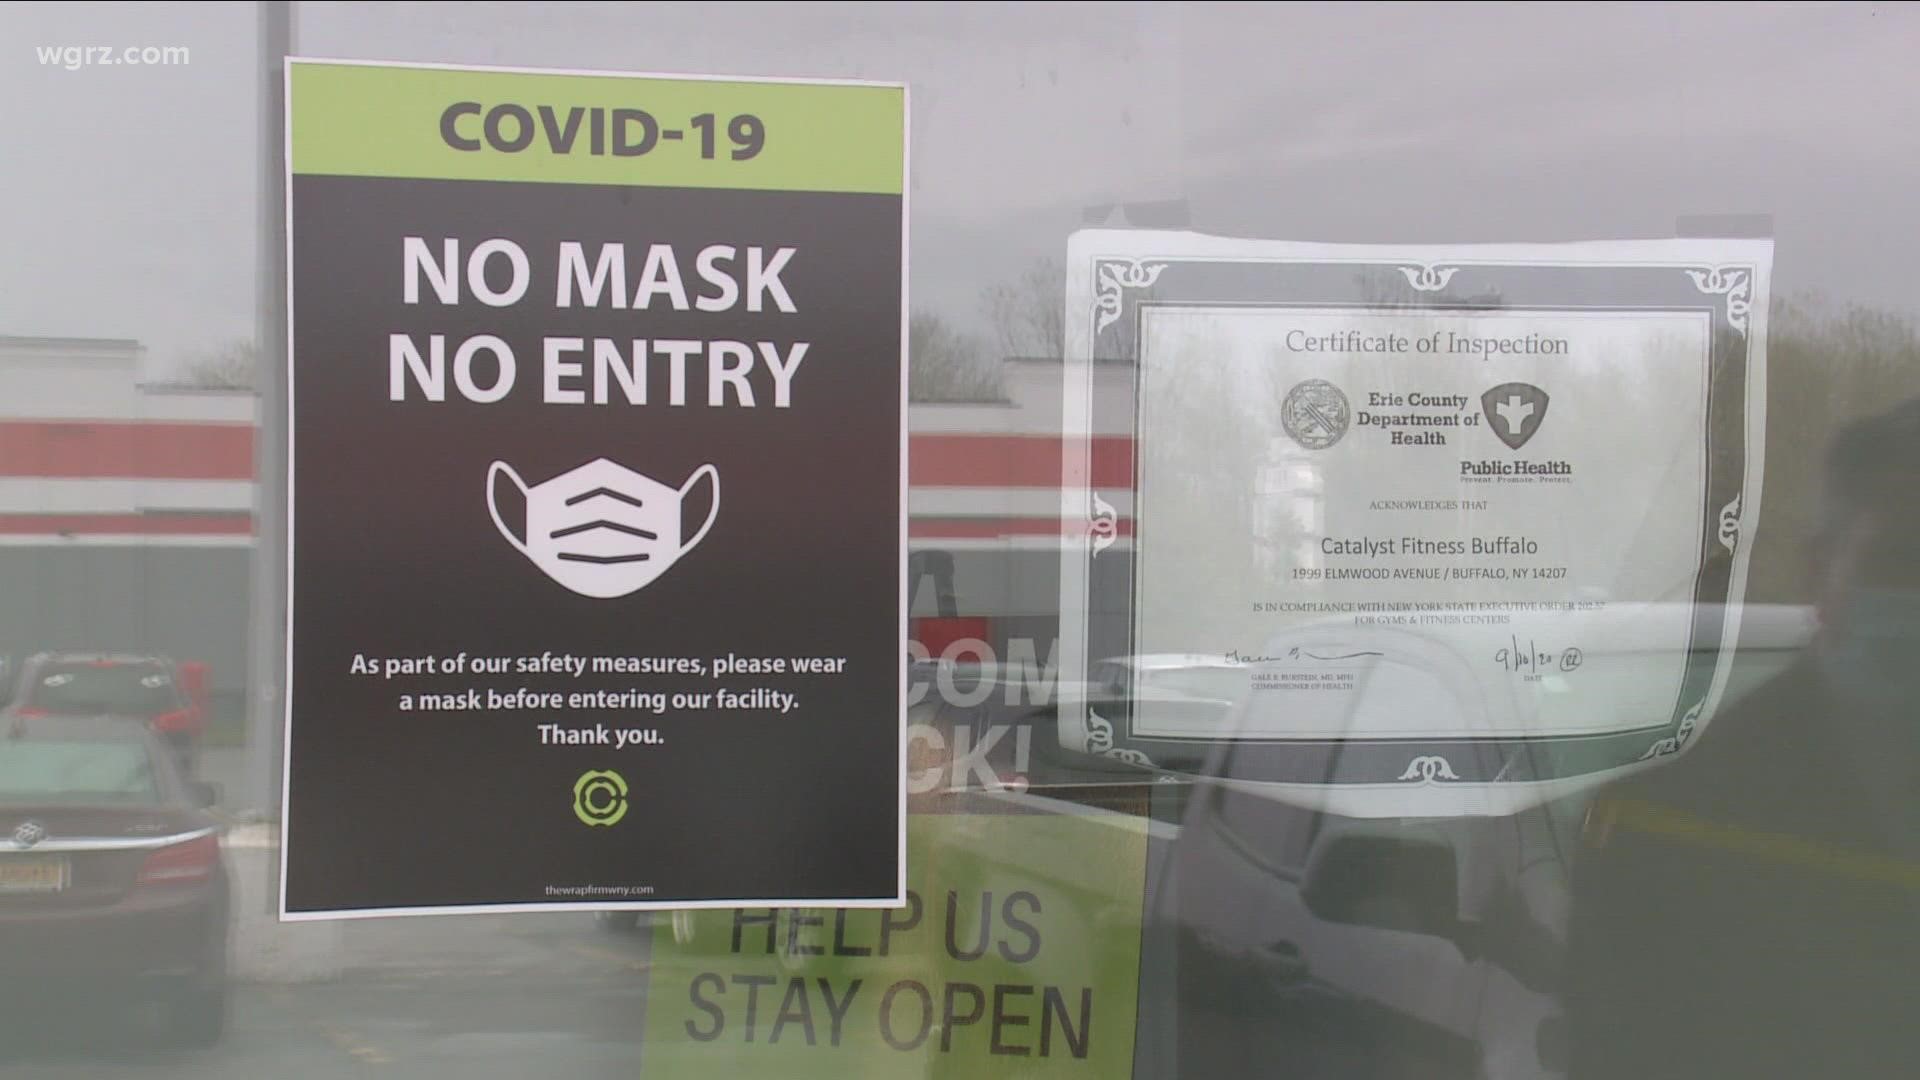 Plans for mask mandate protest in Erie County